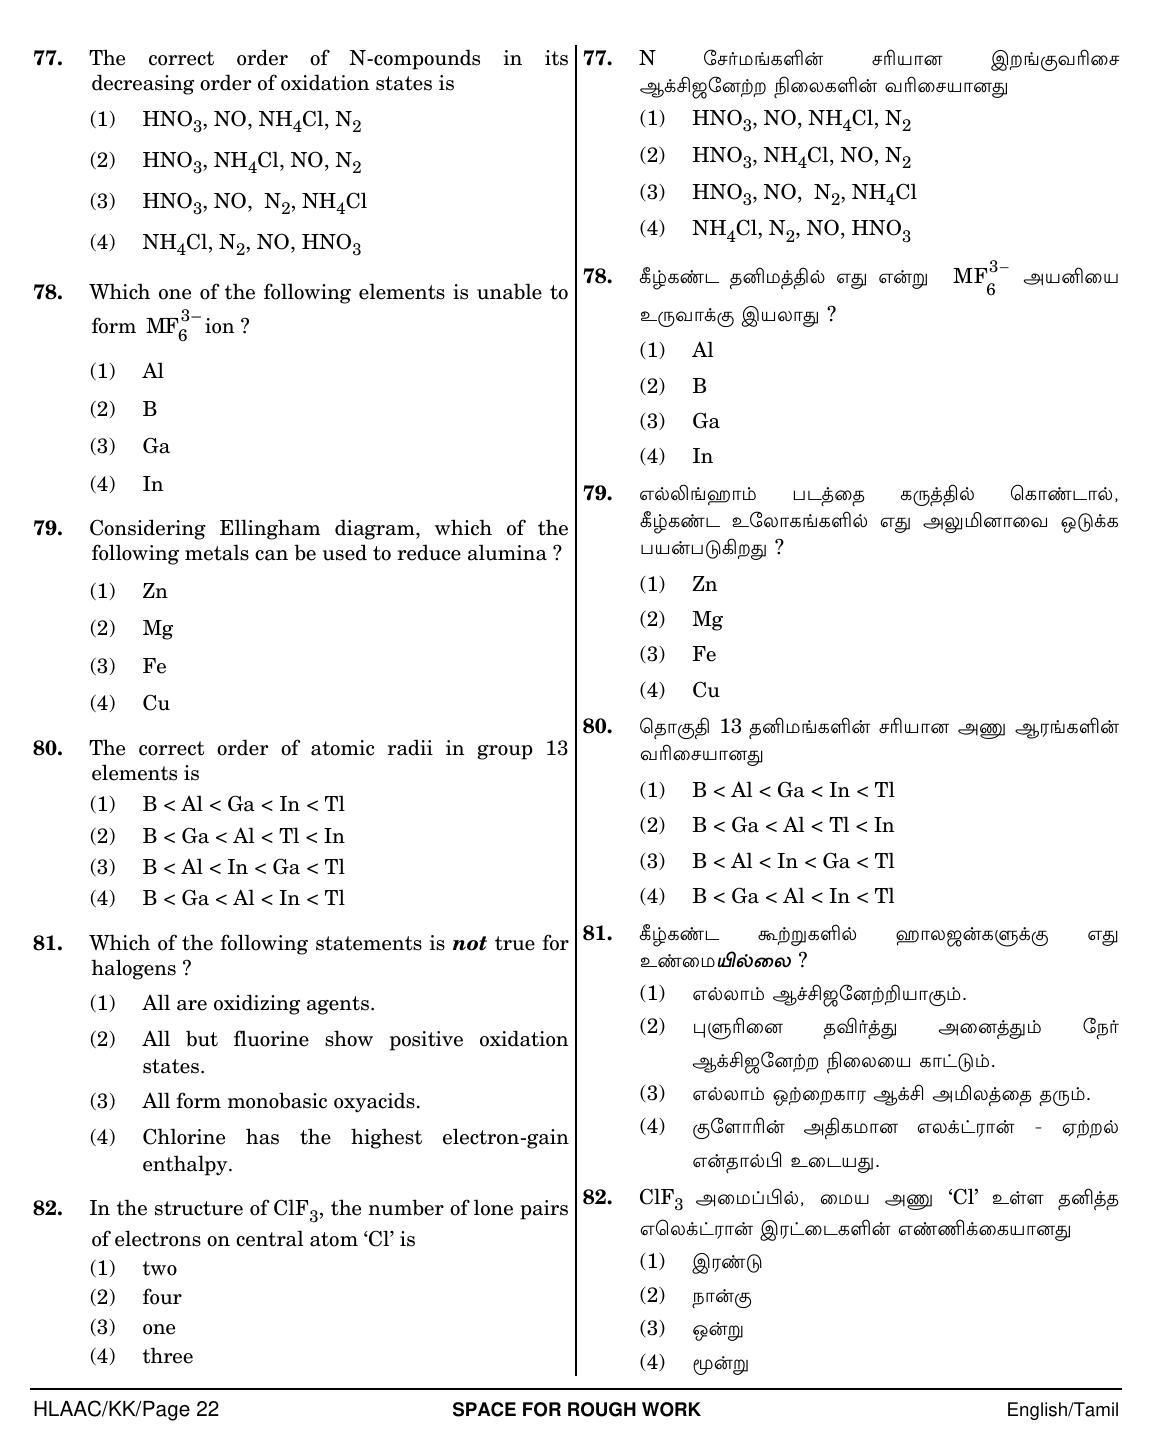 NEET Tamil KK 2018 Question Paper - Page 22